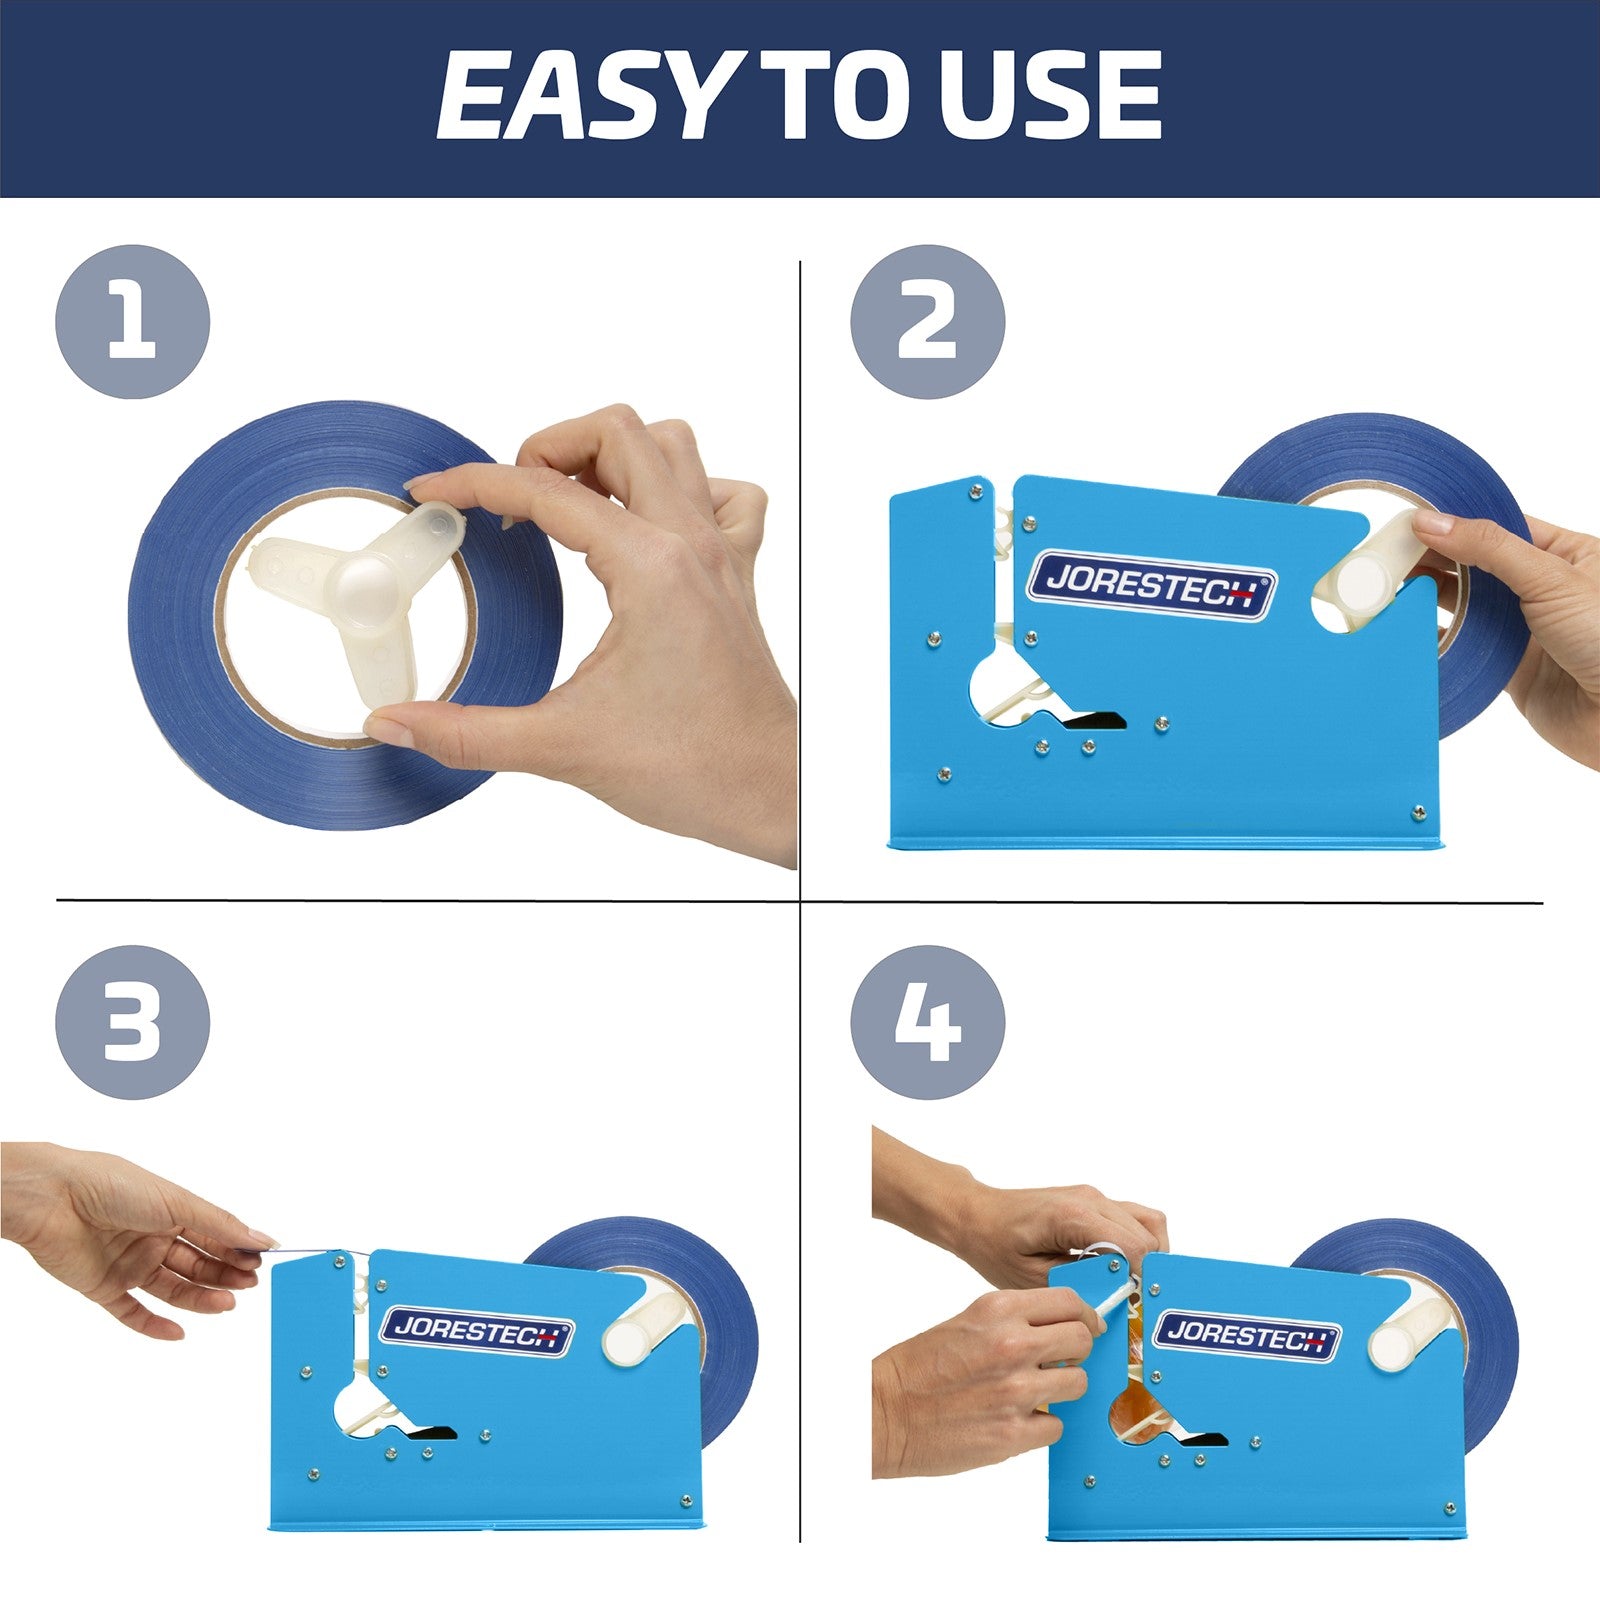 Split sequence of four steps showing how to install the adhesive tape to the JORESTECH manual bag taper. Top blue banner reads: 